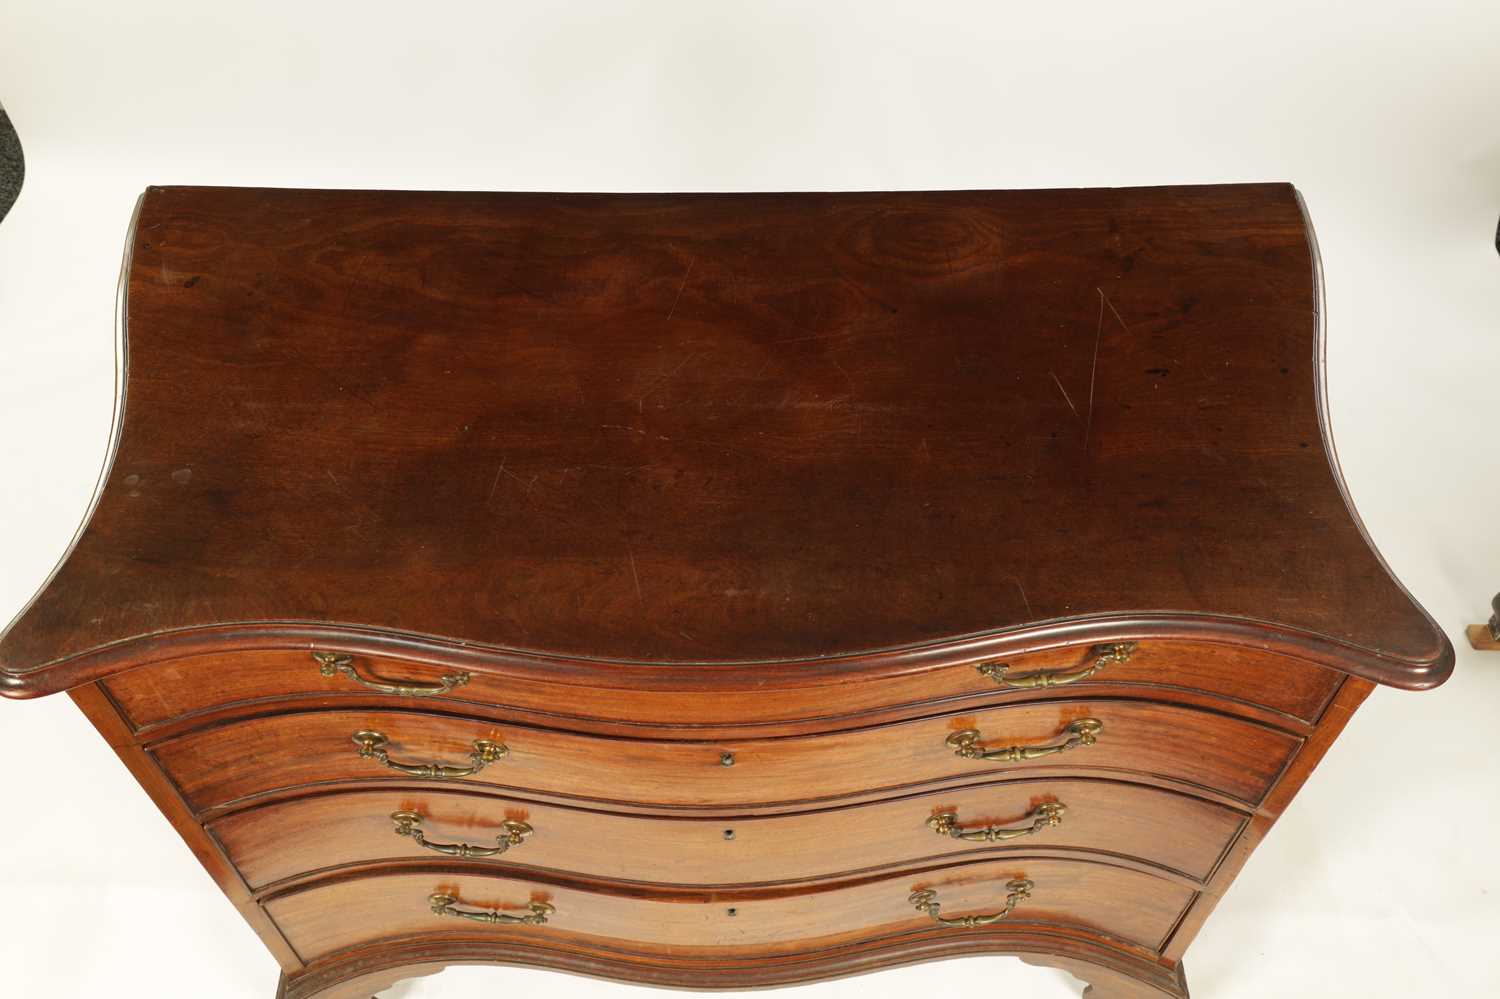 A FINE GEORGE III LOW WAISTED MAHOGANY SERPENTINE CHEST OF DRAWERS - Image 2 of 7